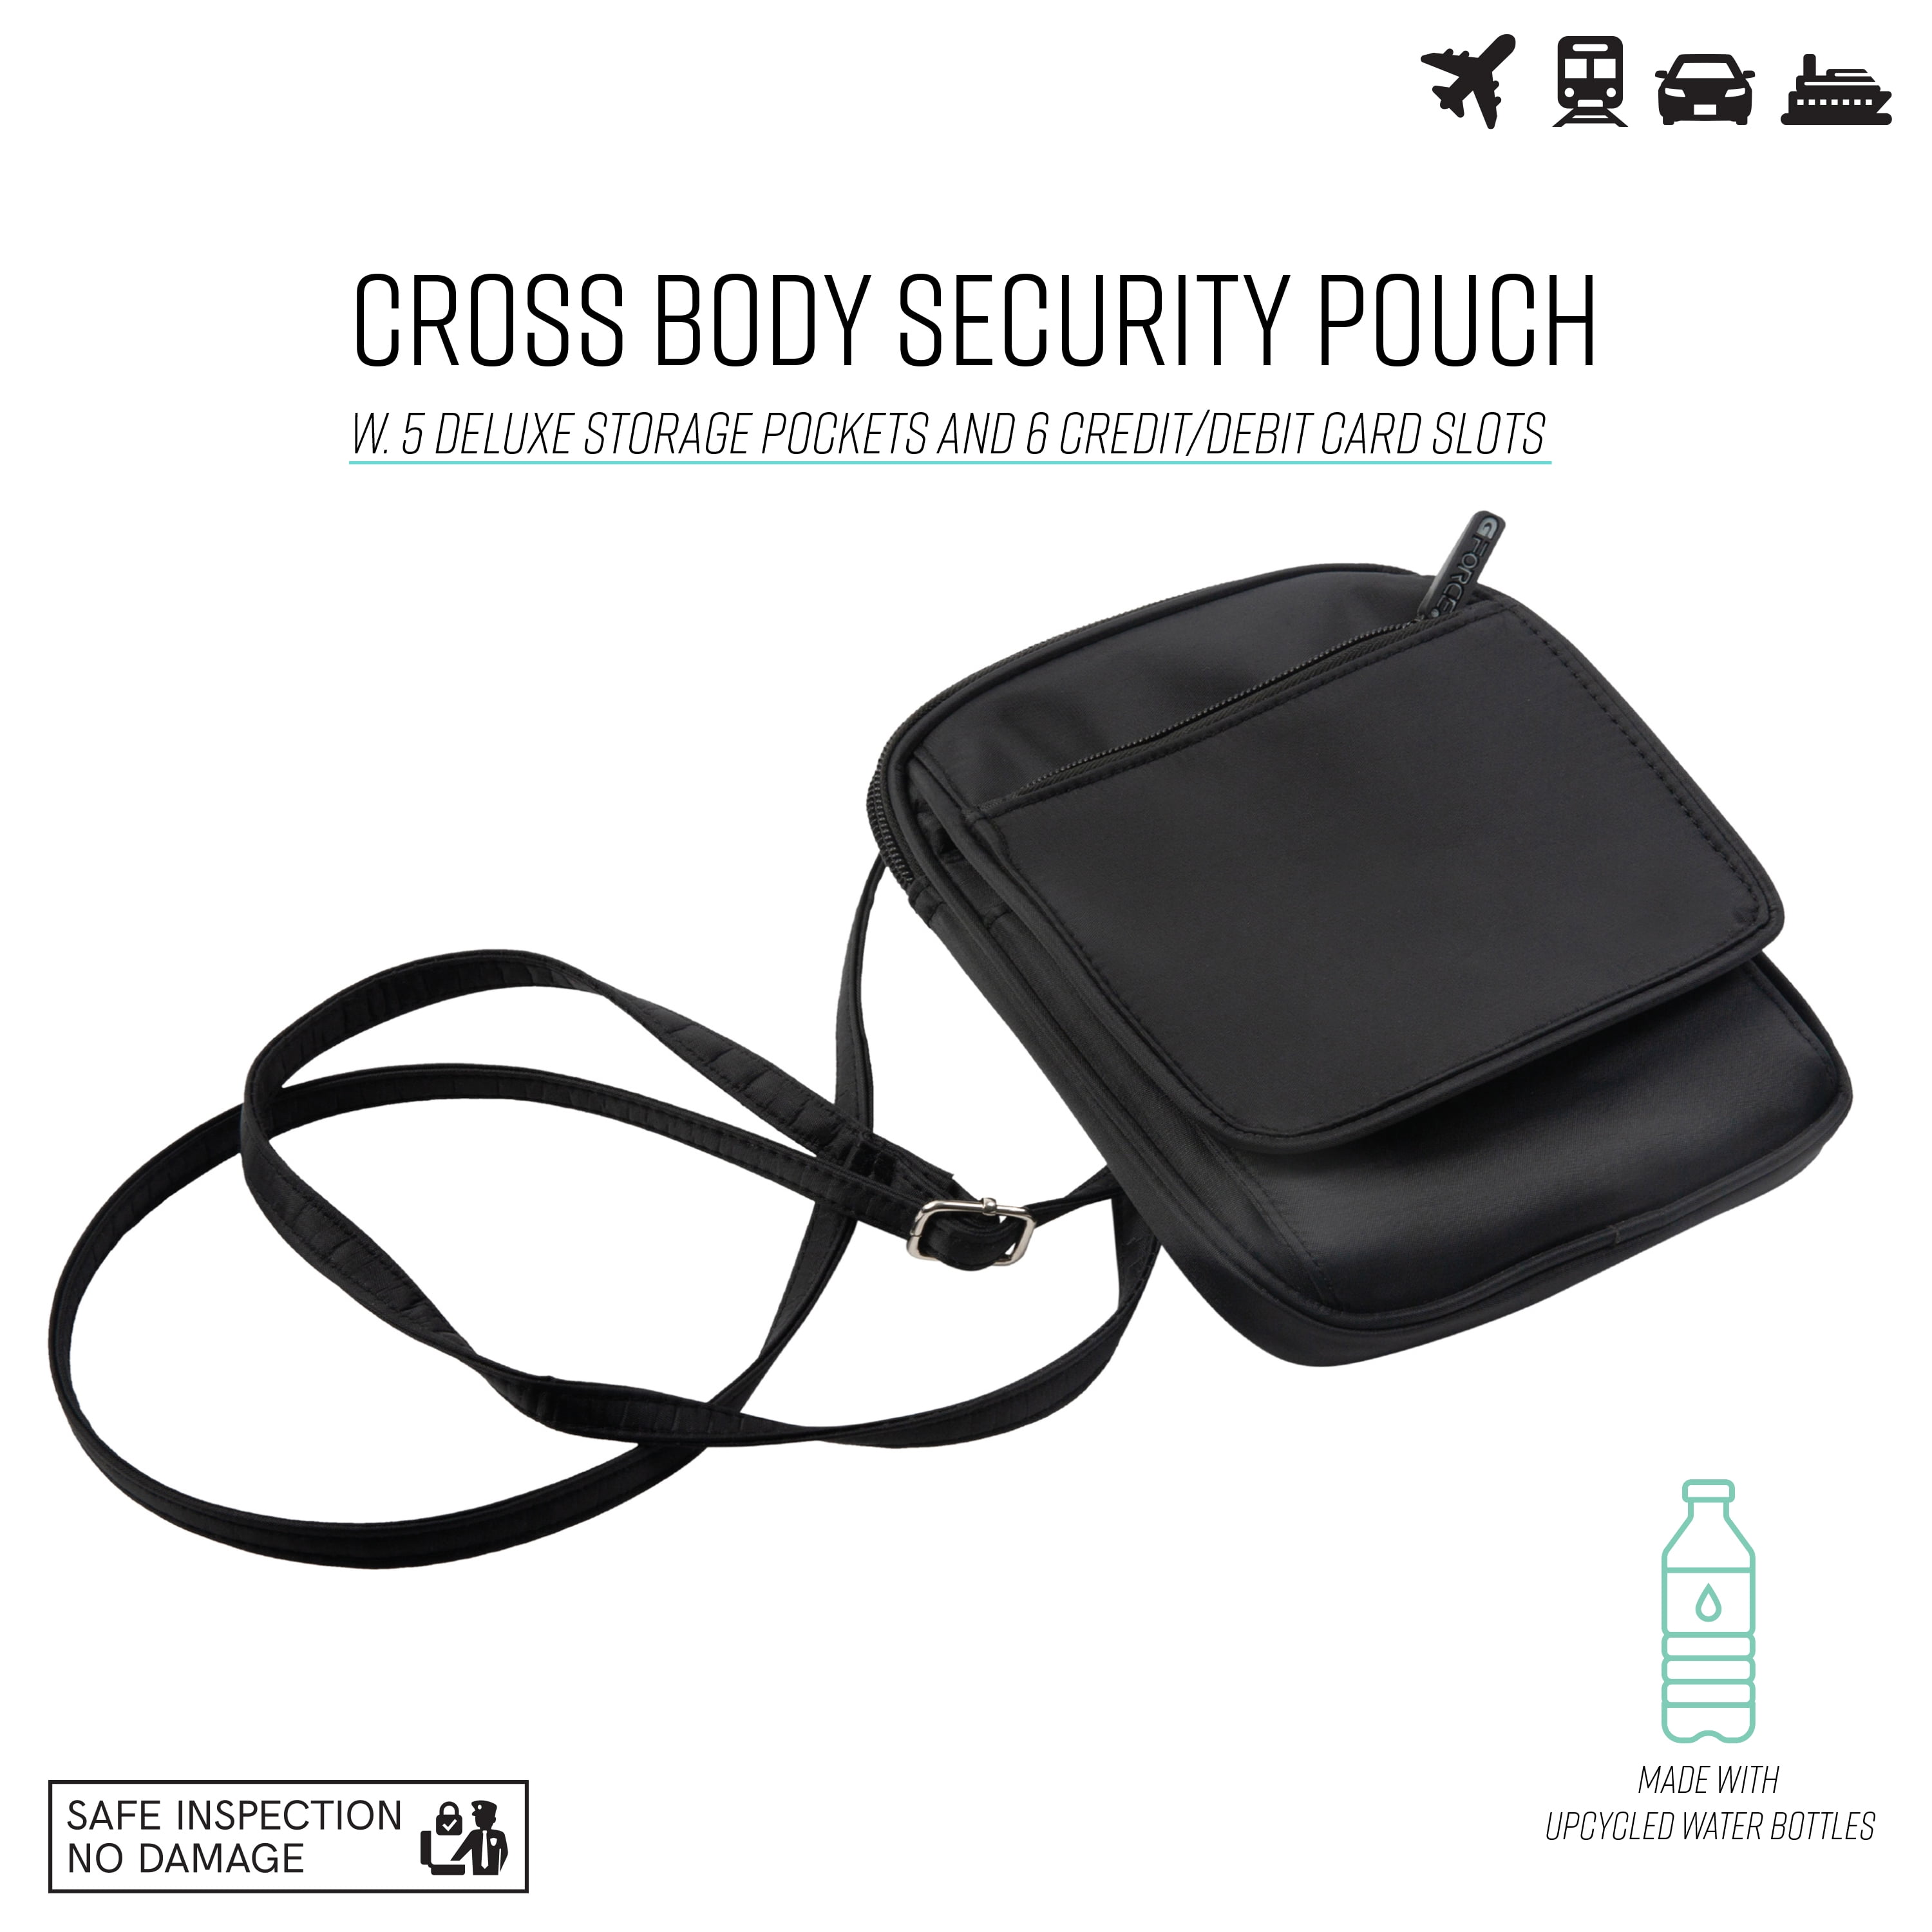 G Force Cross Body Security Pouch, RFID, Black